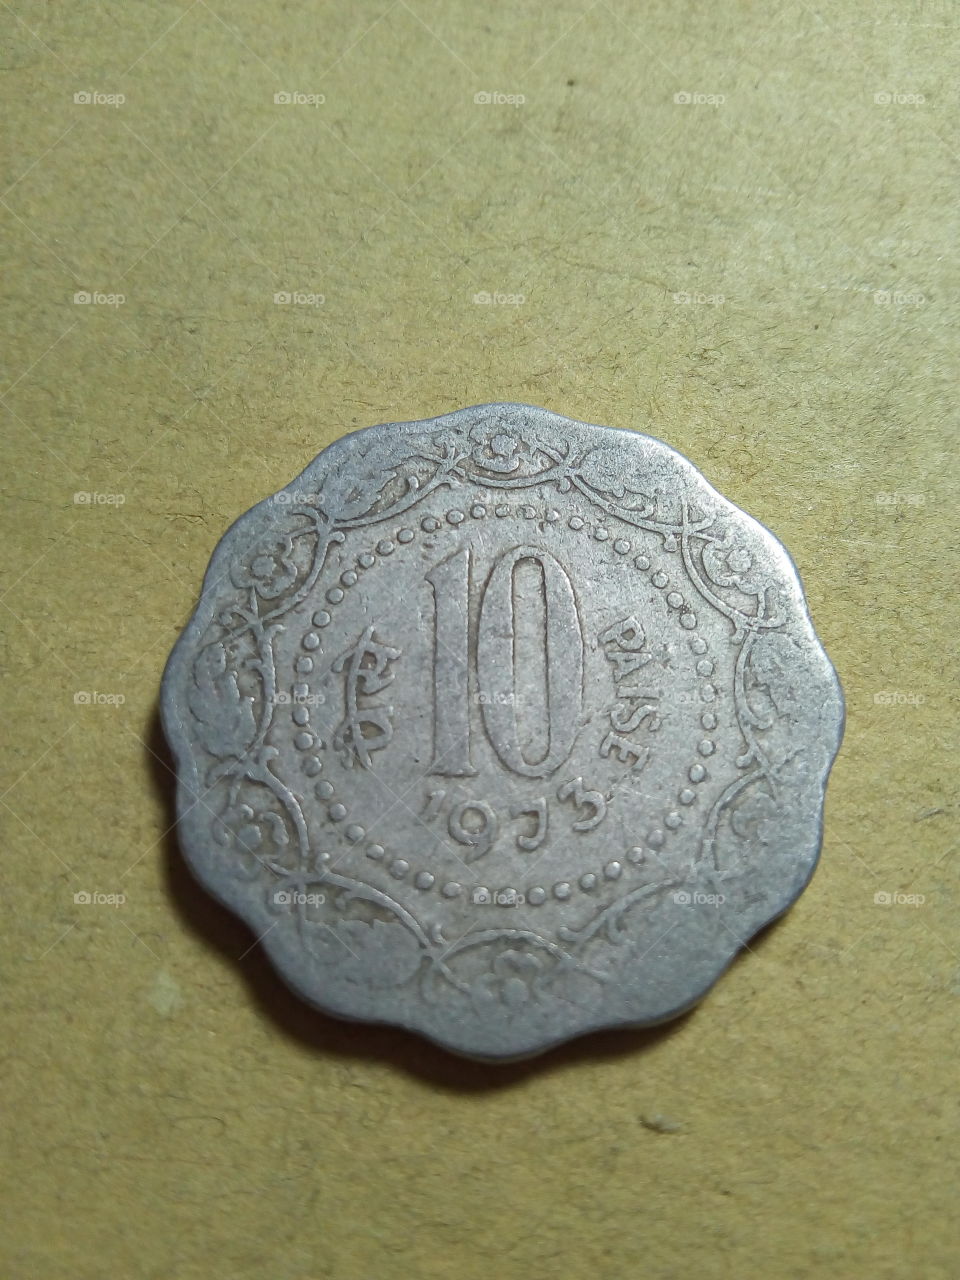 A coin of ten paise- 1/10 share of Indian Rupee issued by Government of India in 1973.